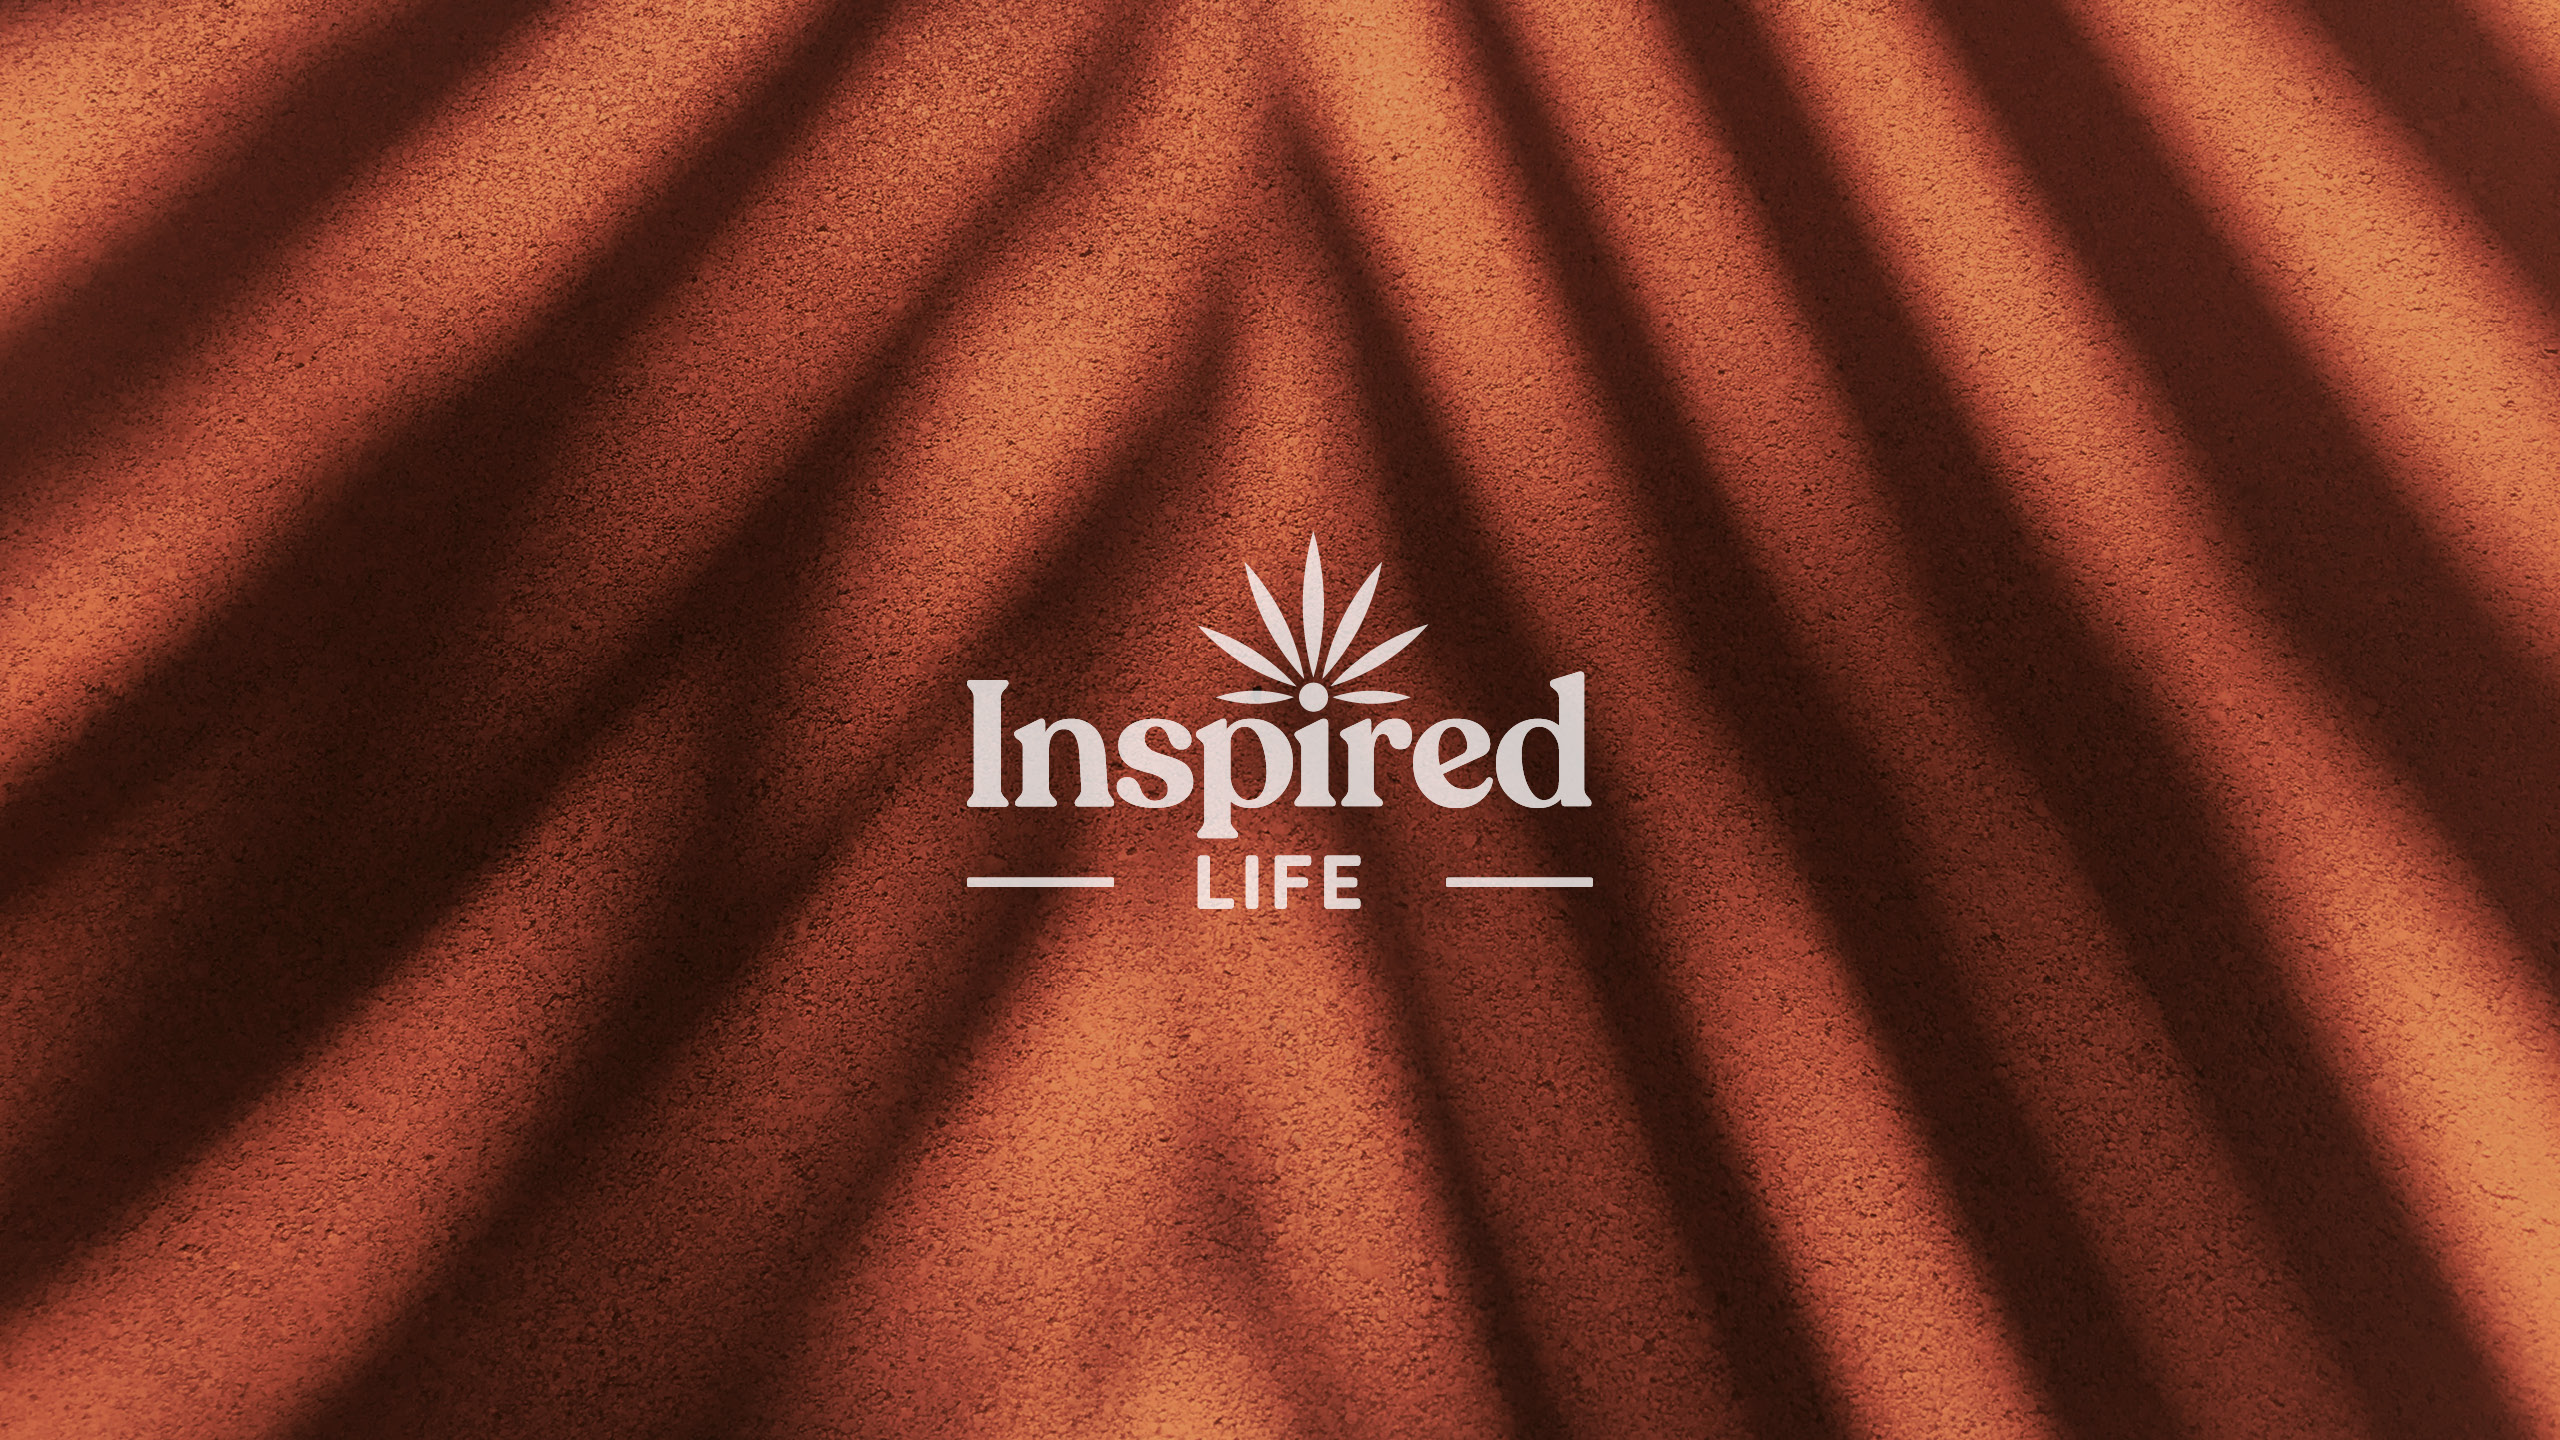 Inspired life logo on orange background with leaf casting a shadow